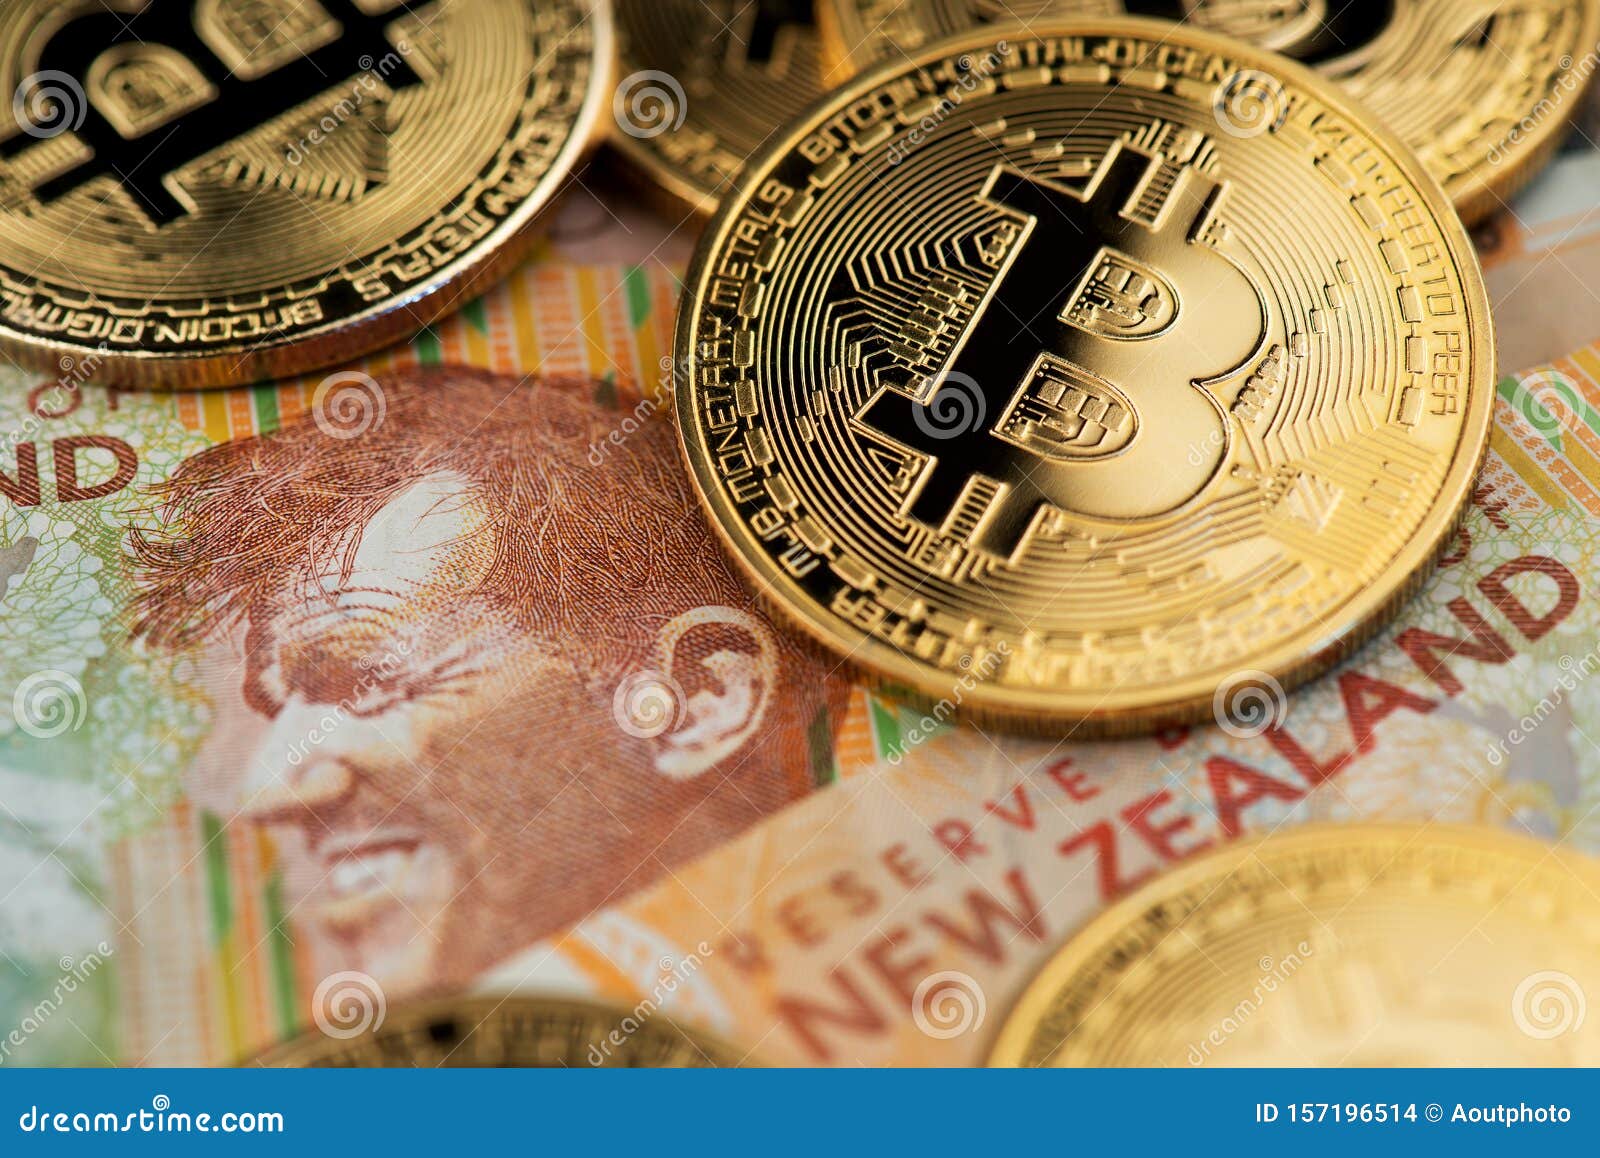 How much is 1 bitcoin btc (BTC) to $ (NZD) according to the foreign exchange rate for today